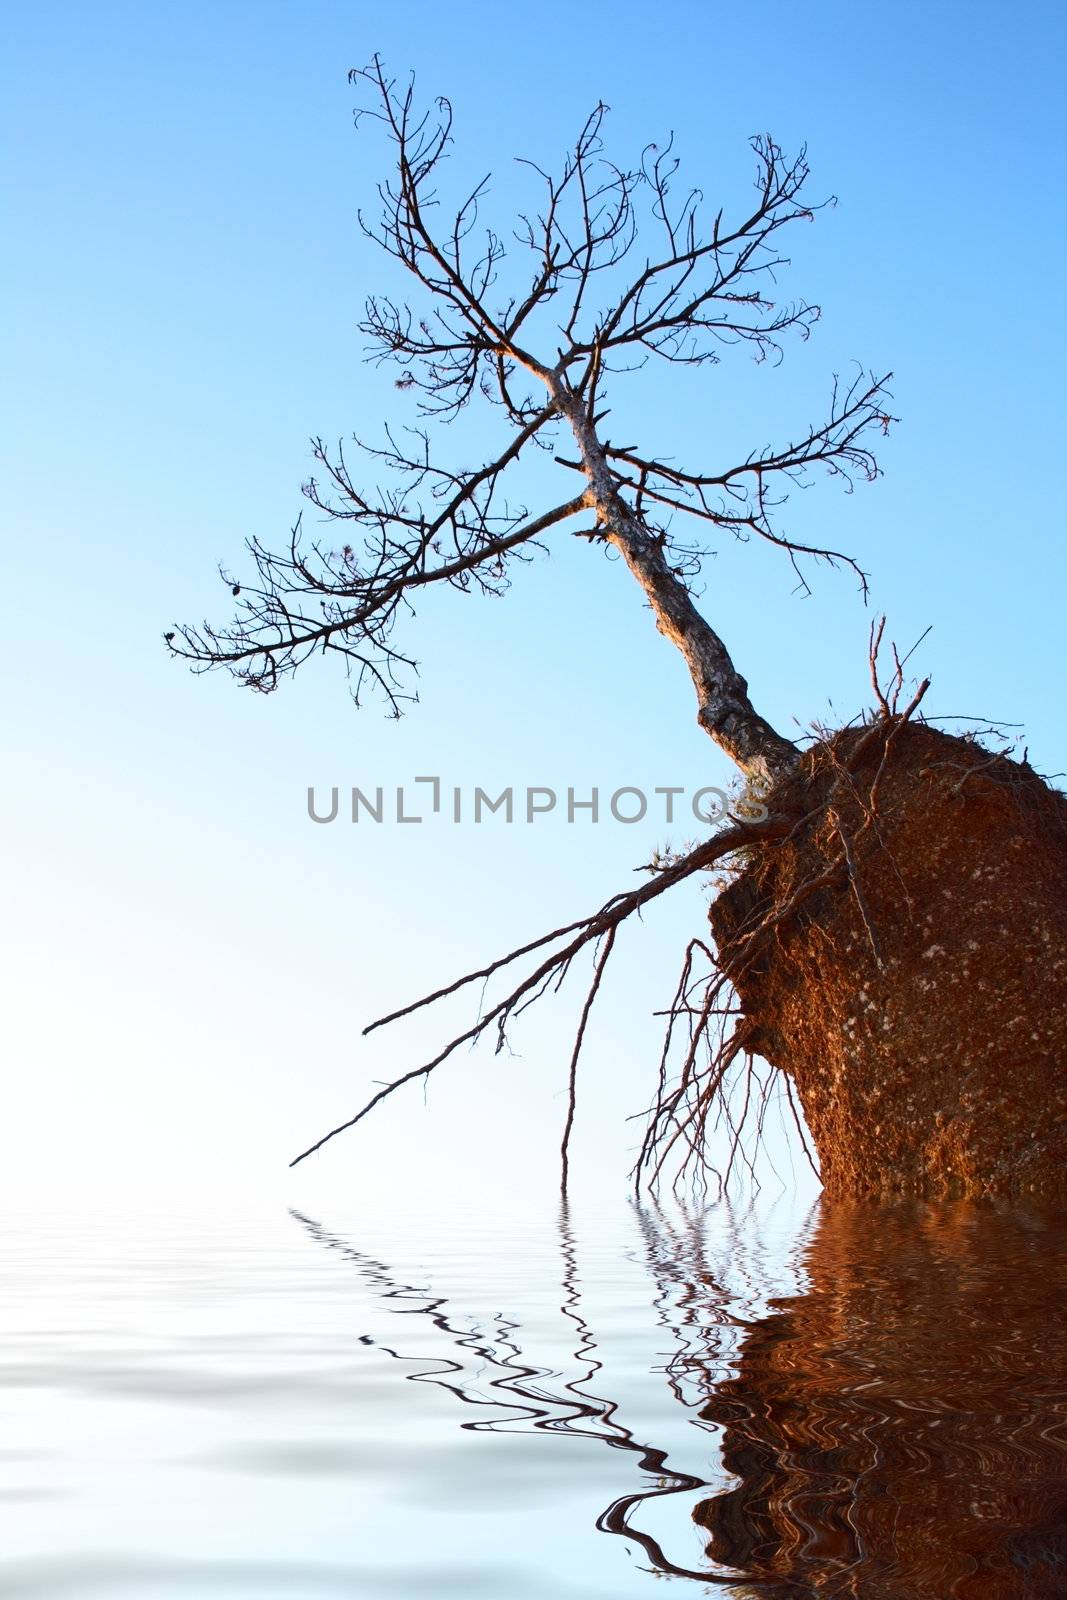 lonely dry tree on red rock flooding in water